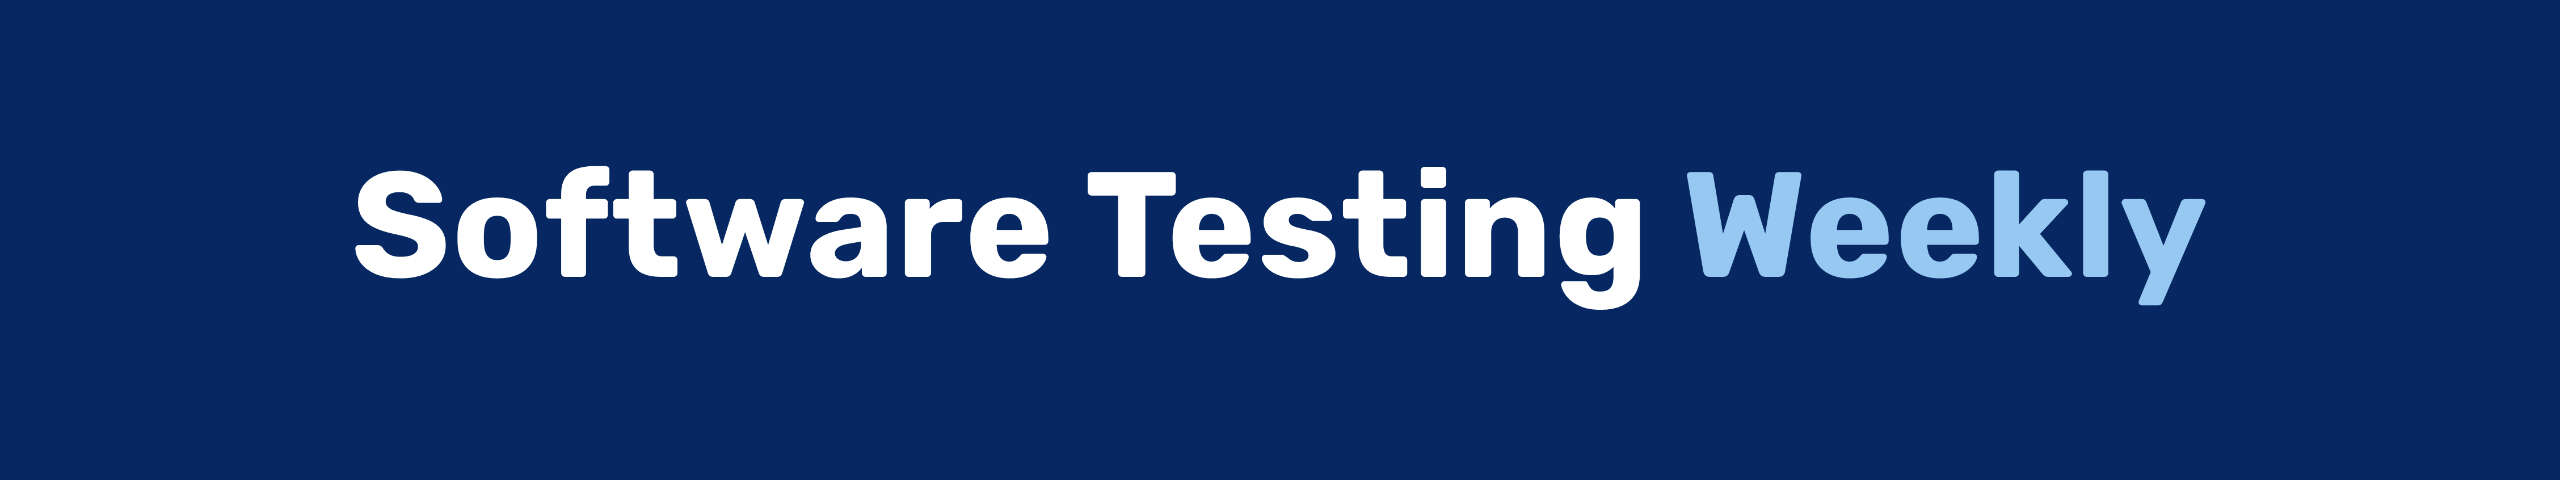 brainbench certification on software testing